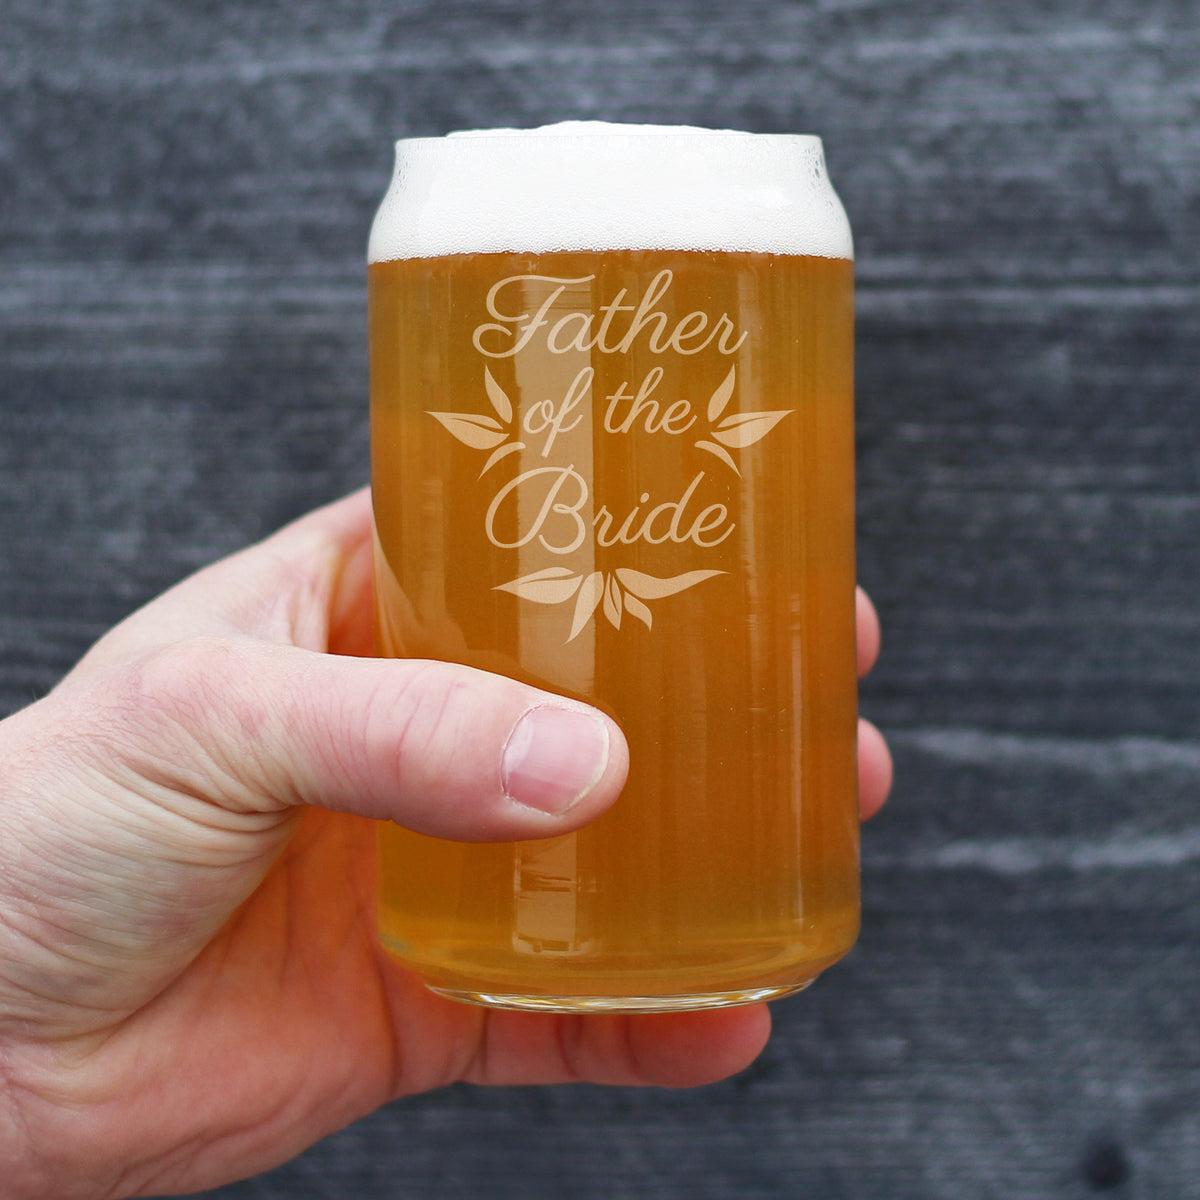 Father of the Bride Beer Can Pint Glass - Unique Wedding Gift for Soon to Be Father-in-Law - Cute Engraved Wedding Cup Gift